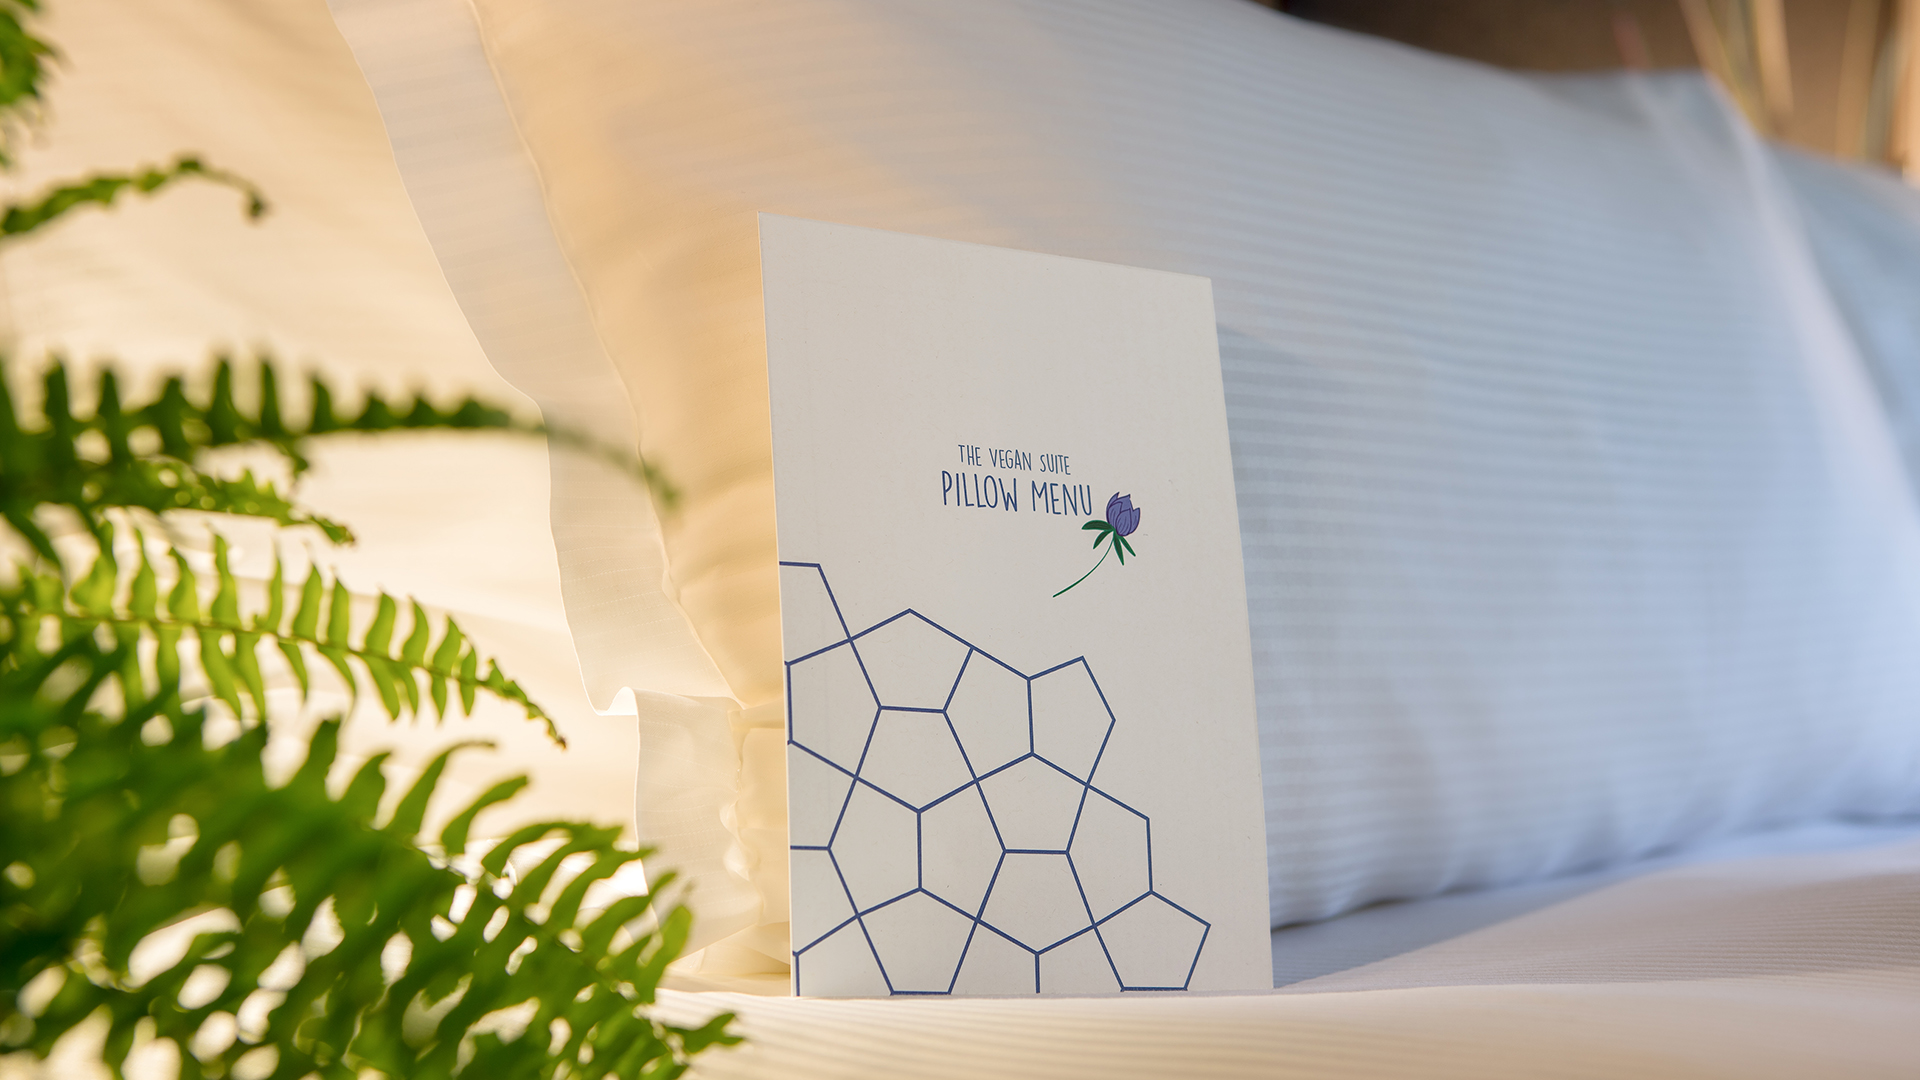 The pillow menu resting on a bed at the Hilton London Bankside hotel and sleeping retreat